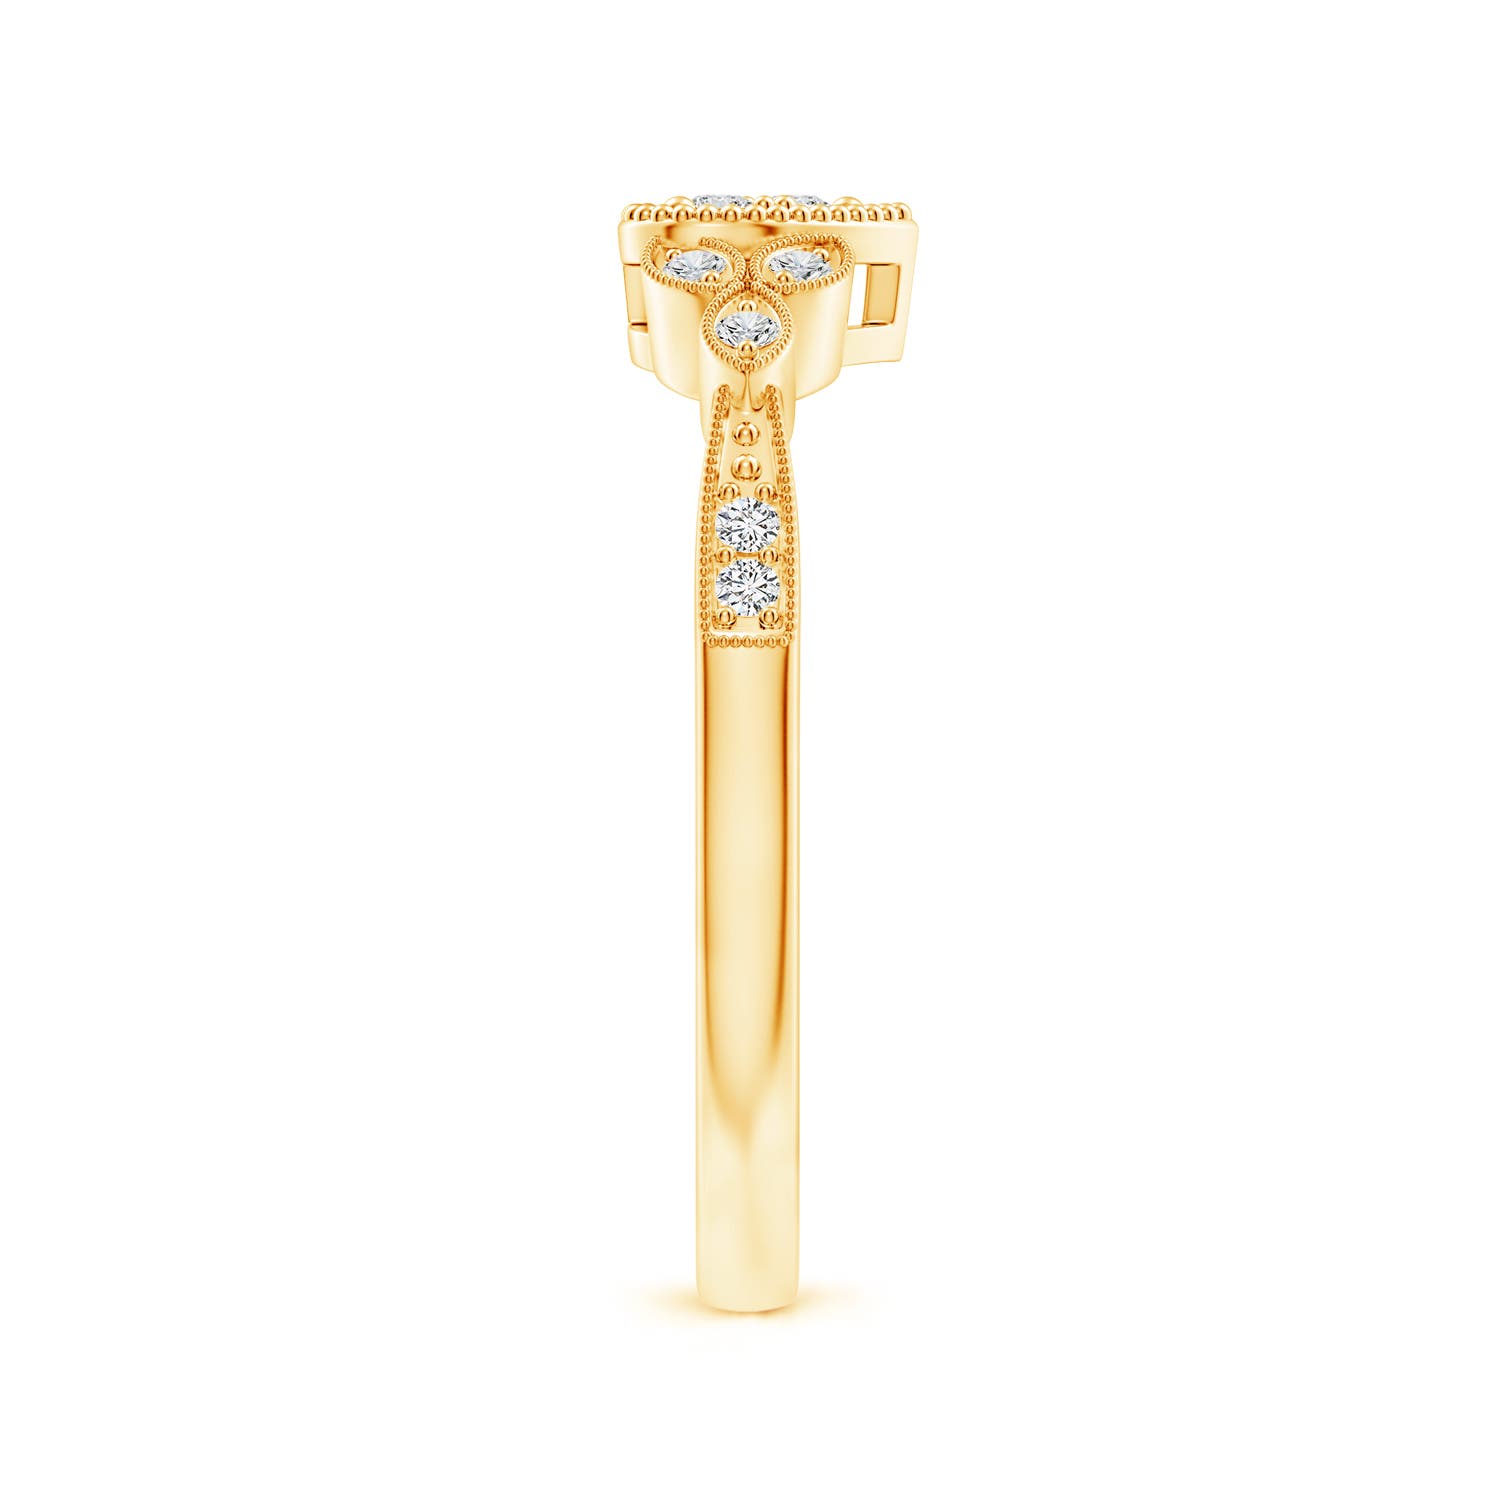 H, SI2 / 0.12 CT / 14 KT Yellow Gold